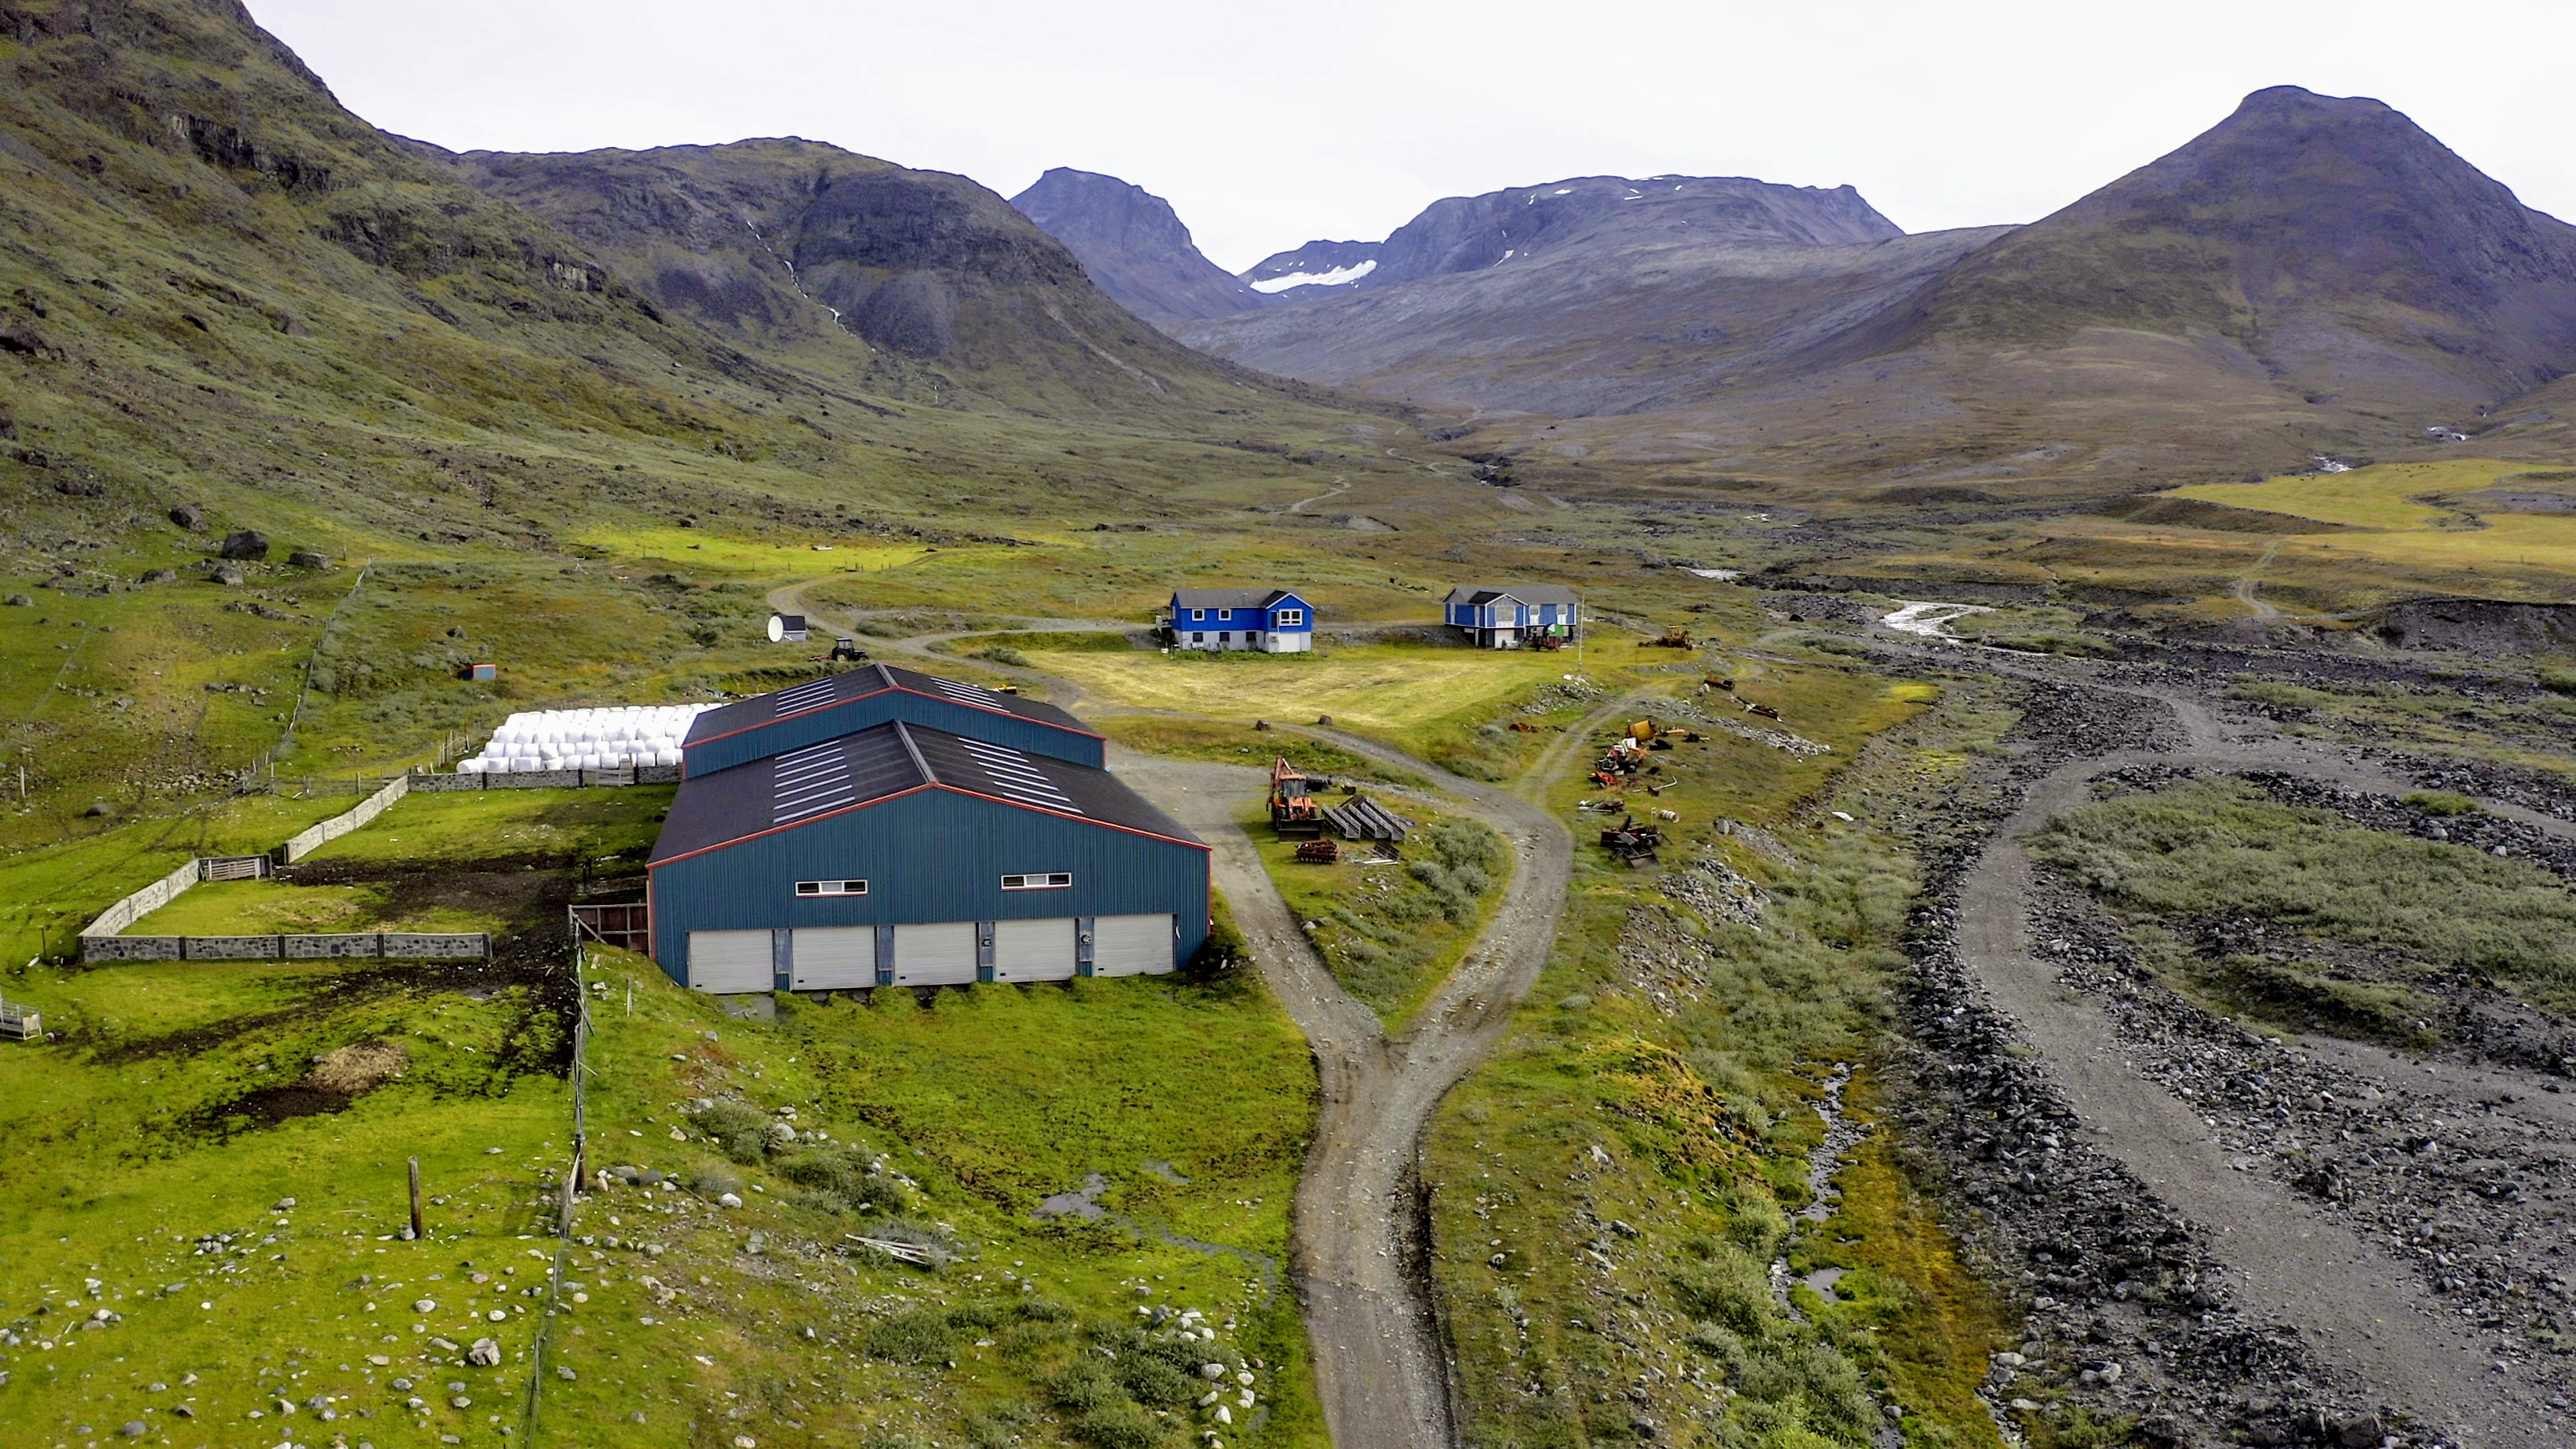 Cattle farm in the Narsaq Valley in southern Greenland close to where Australian-listed company Greenland Minerals wants to build a mine for rare earths